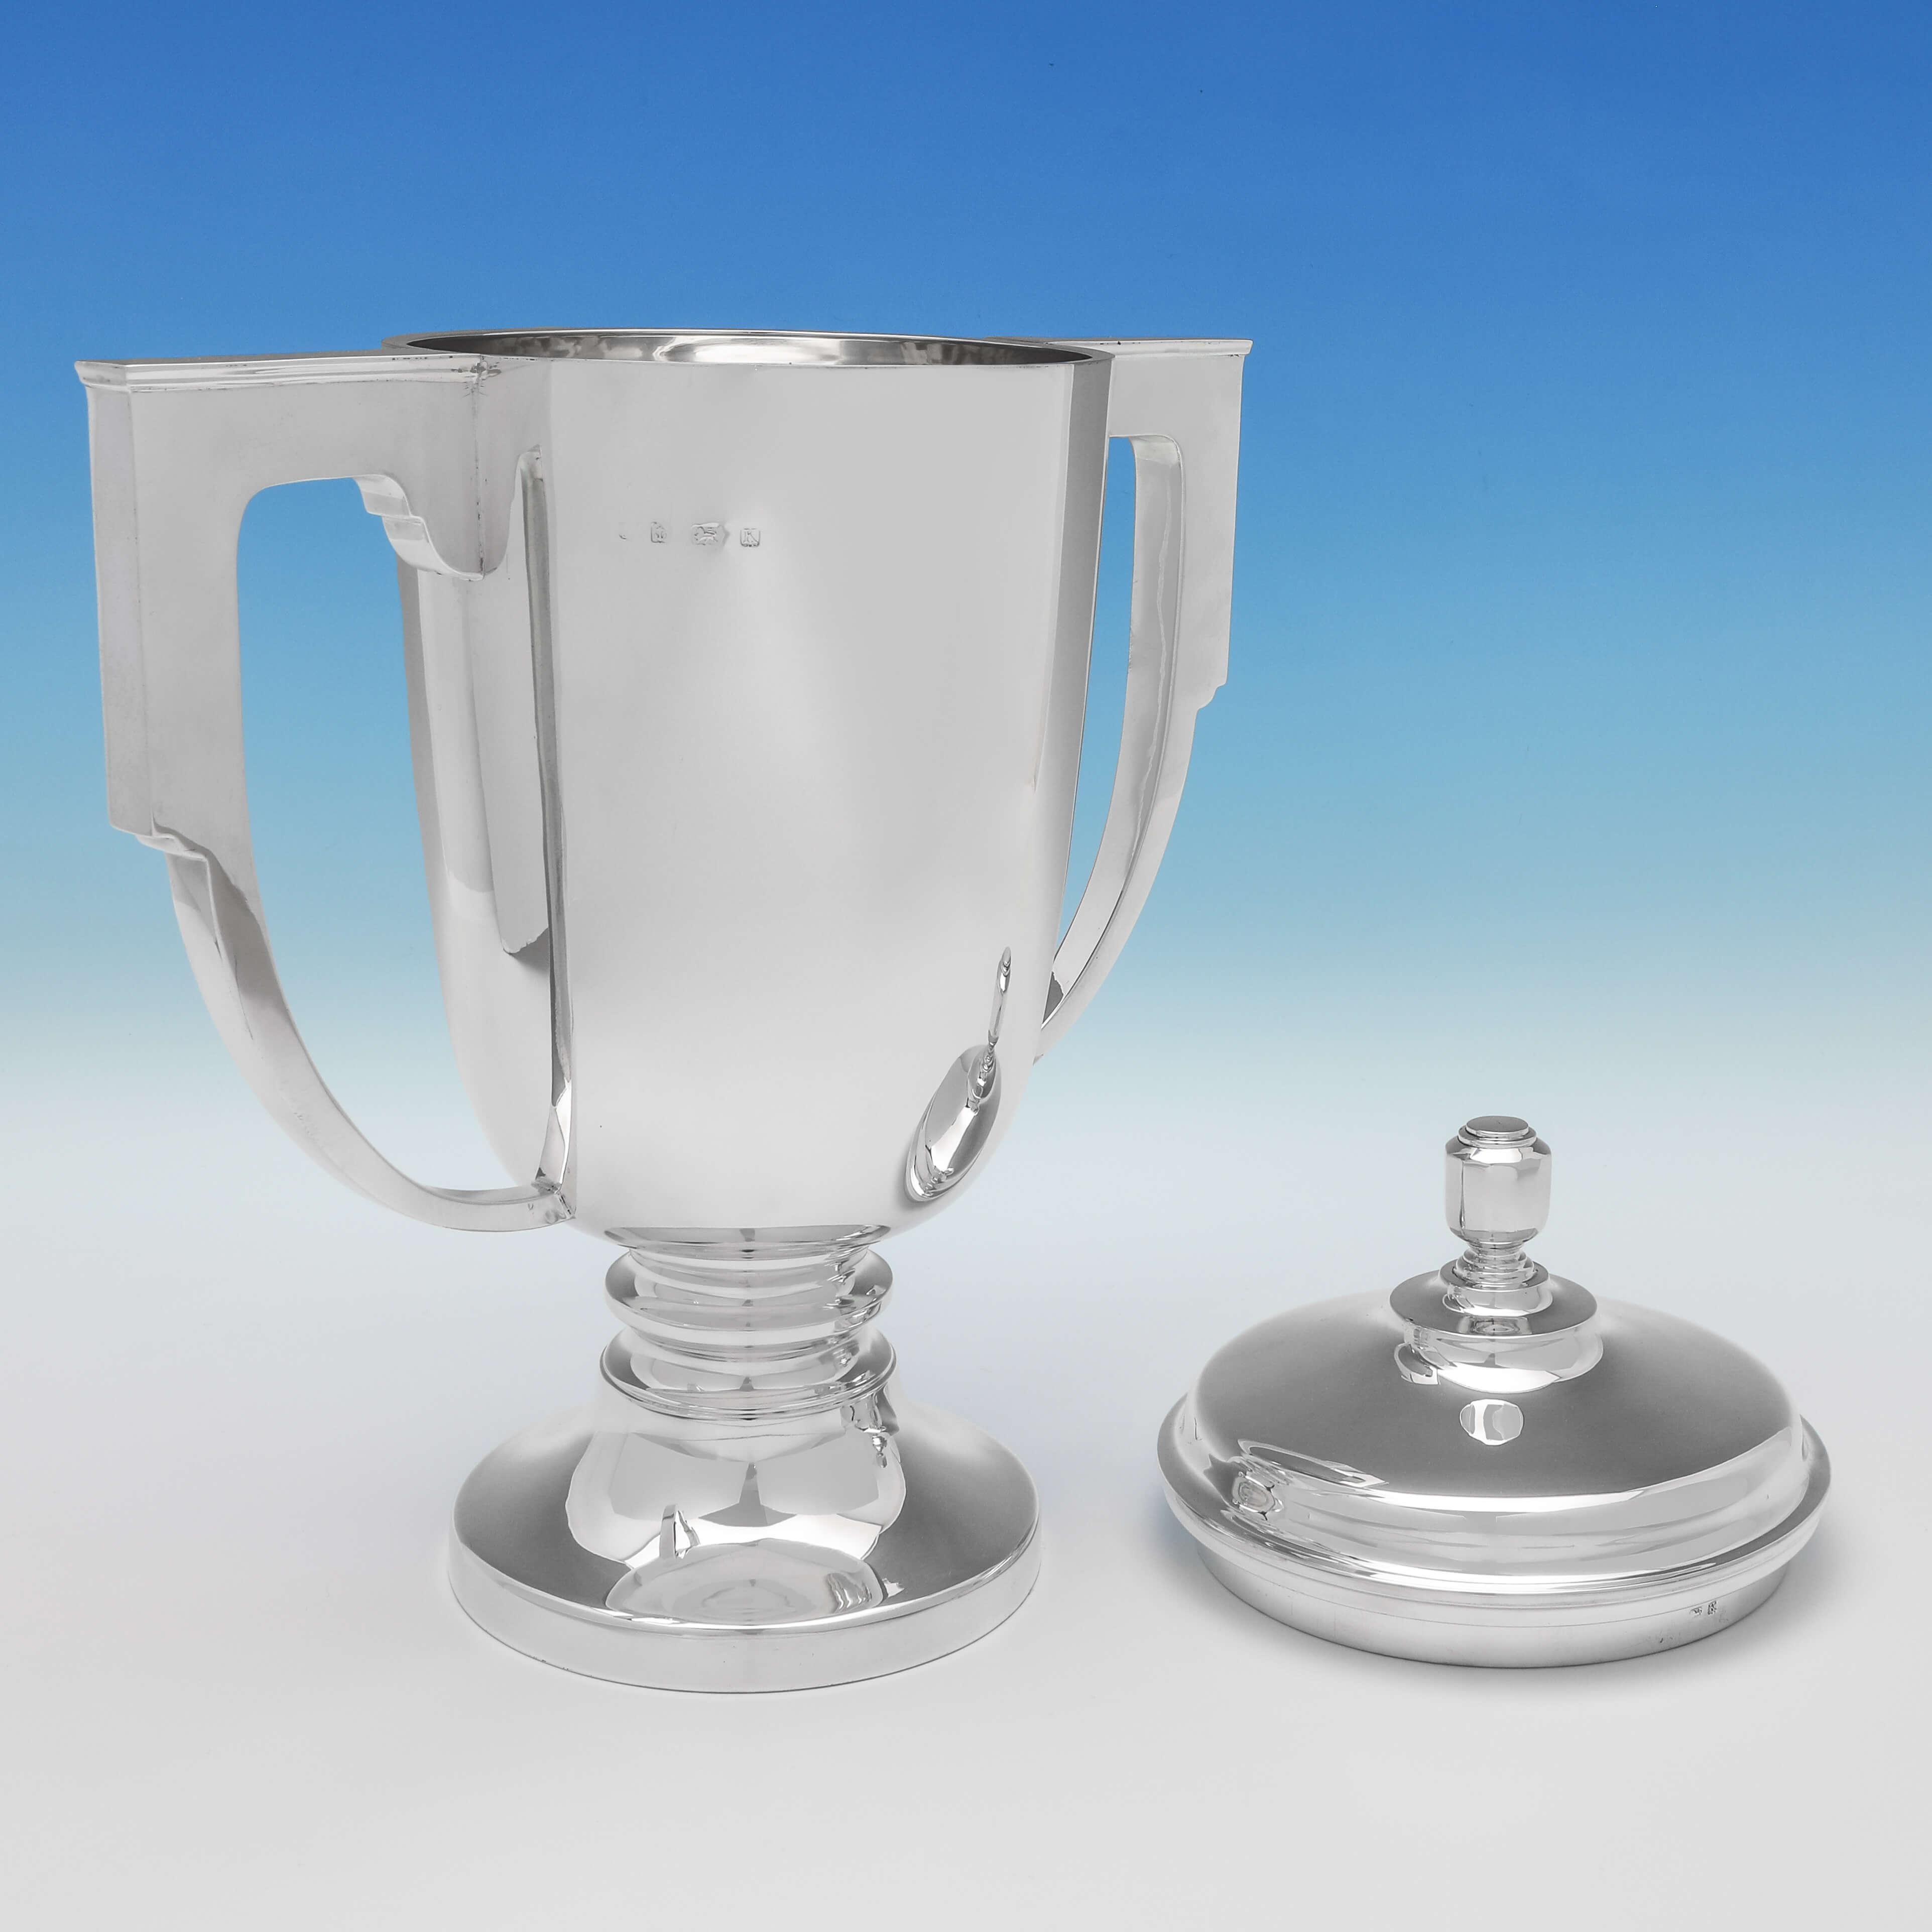 Hallmarked in Birmingham in 1934 by Gibson & Langman, this striking, sterling silver trophy, is in the Art Deco taste, with angular handles, and a plain style. The trophy measures 15.5